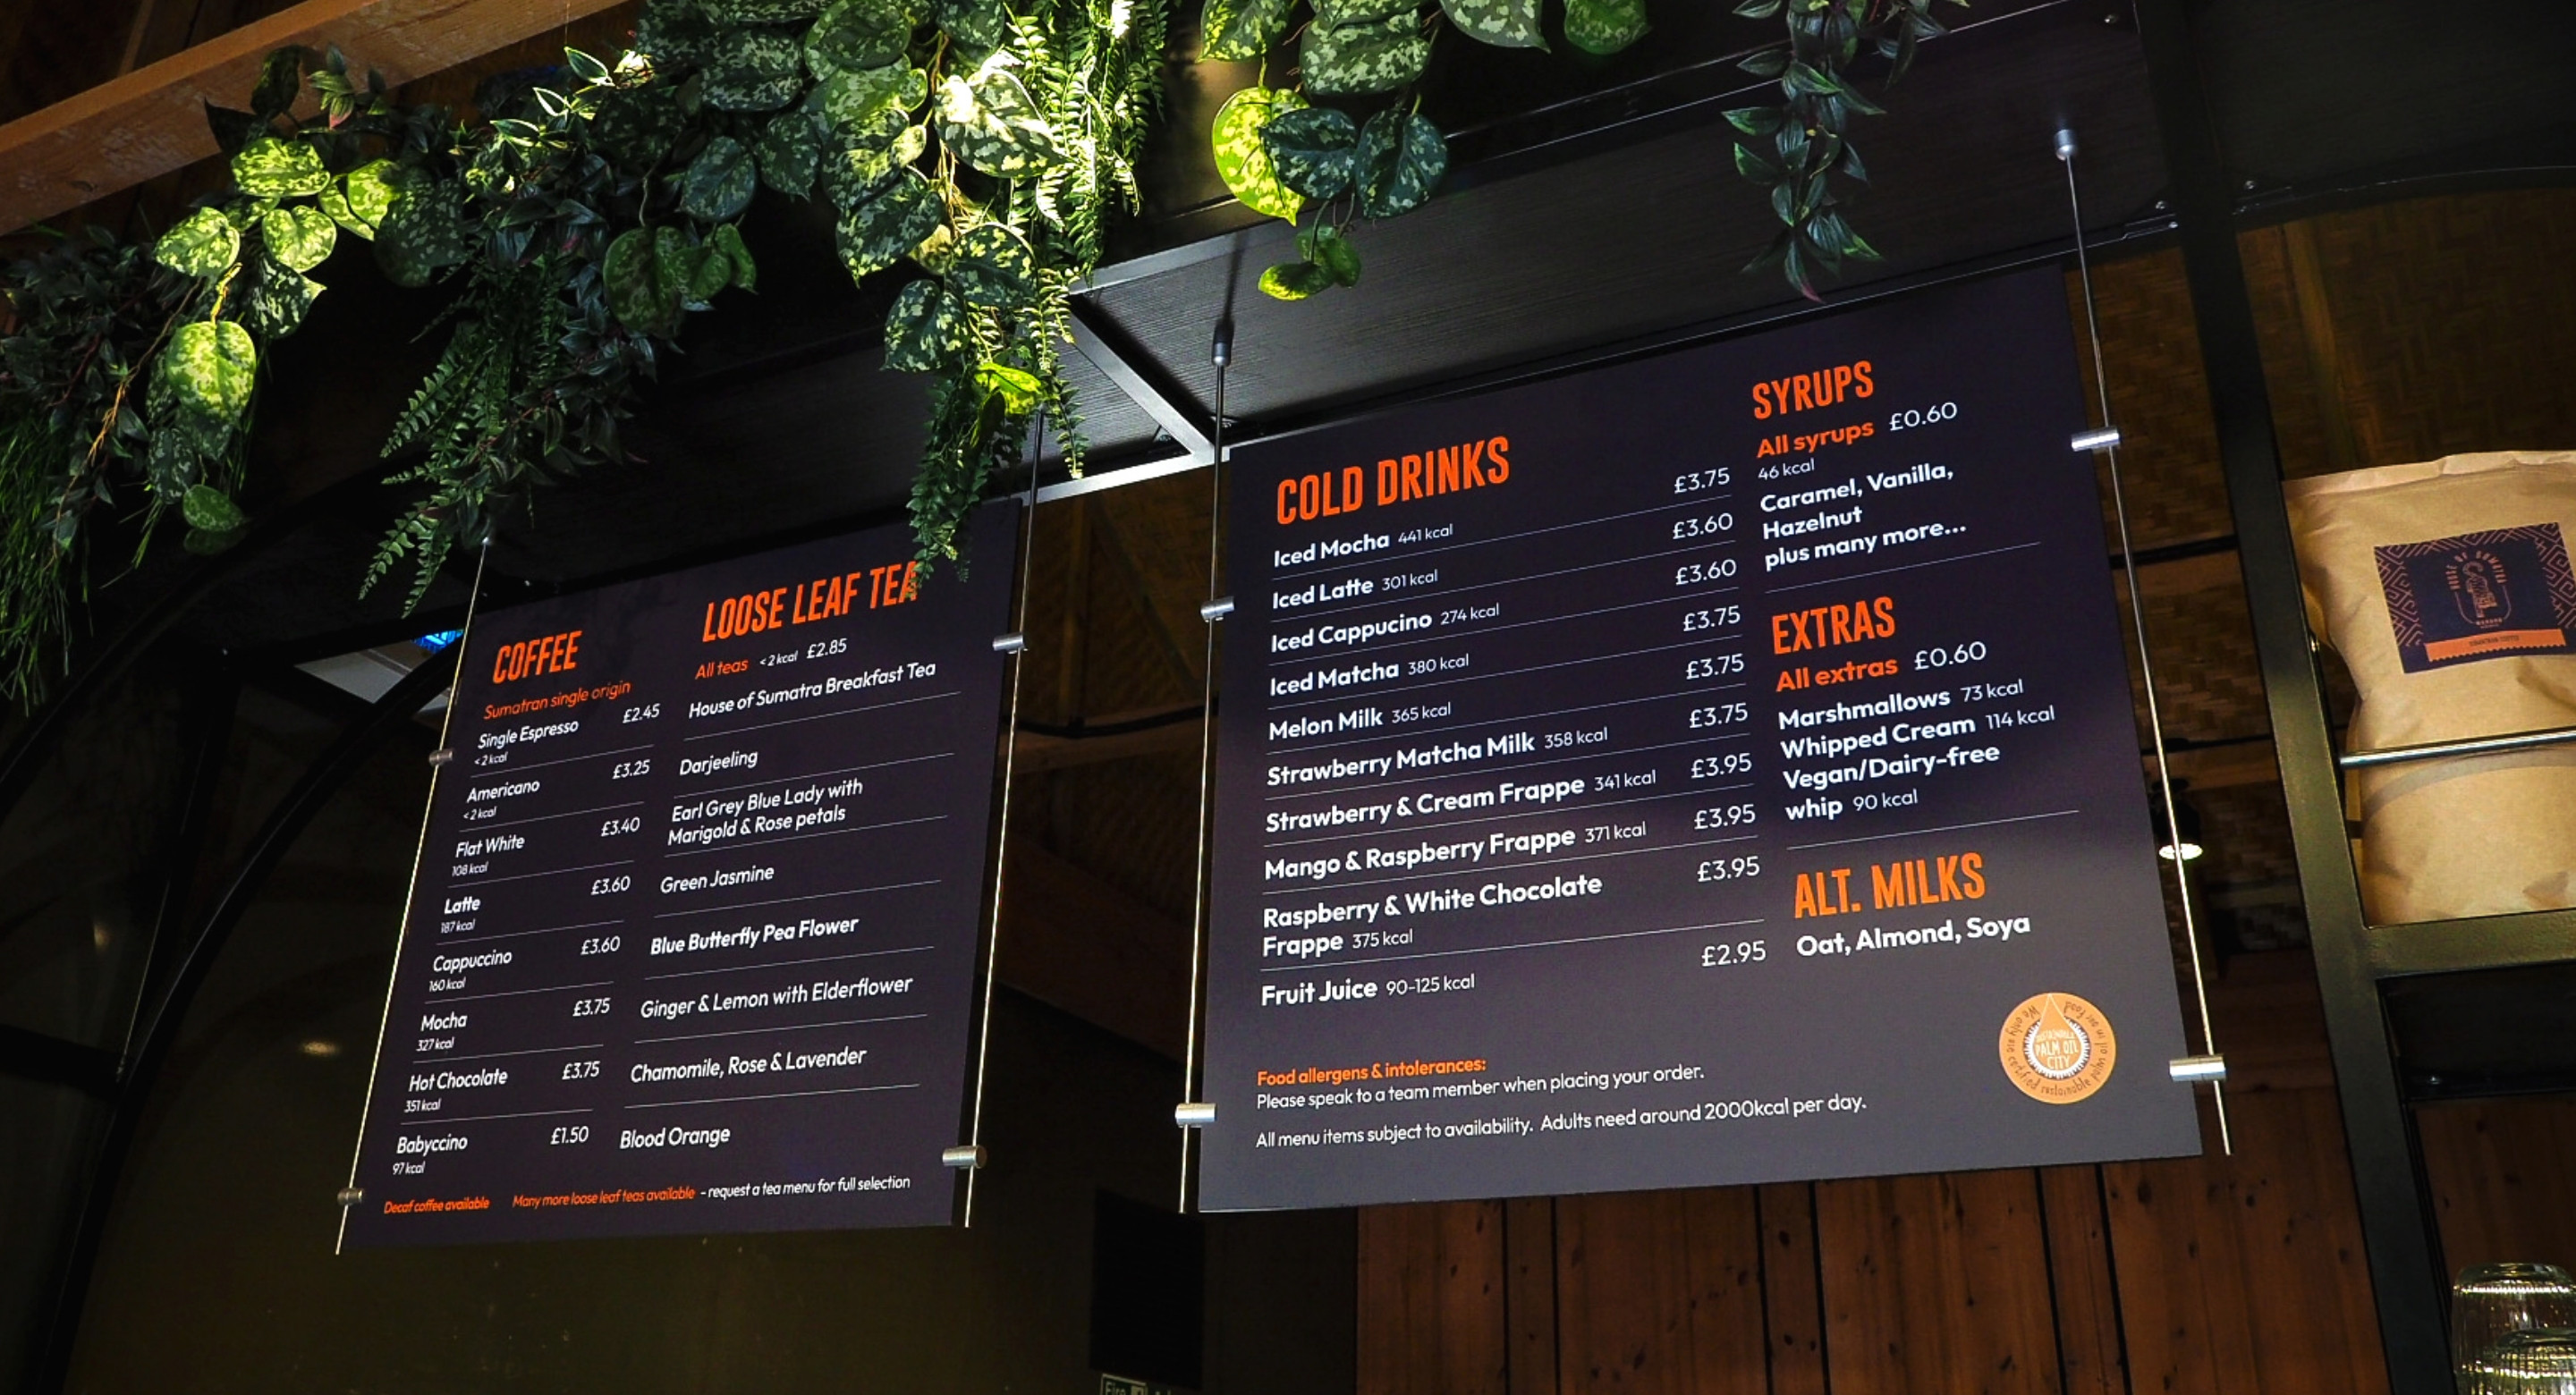 Chester Zoo cafe menu signage